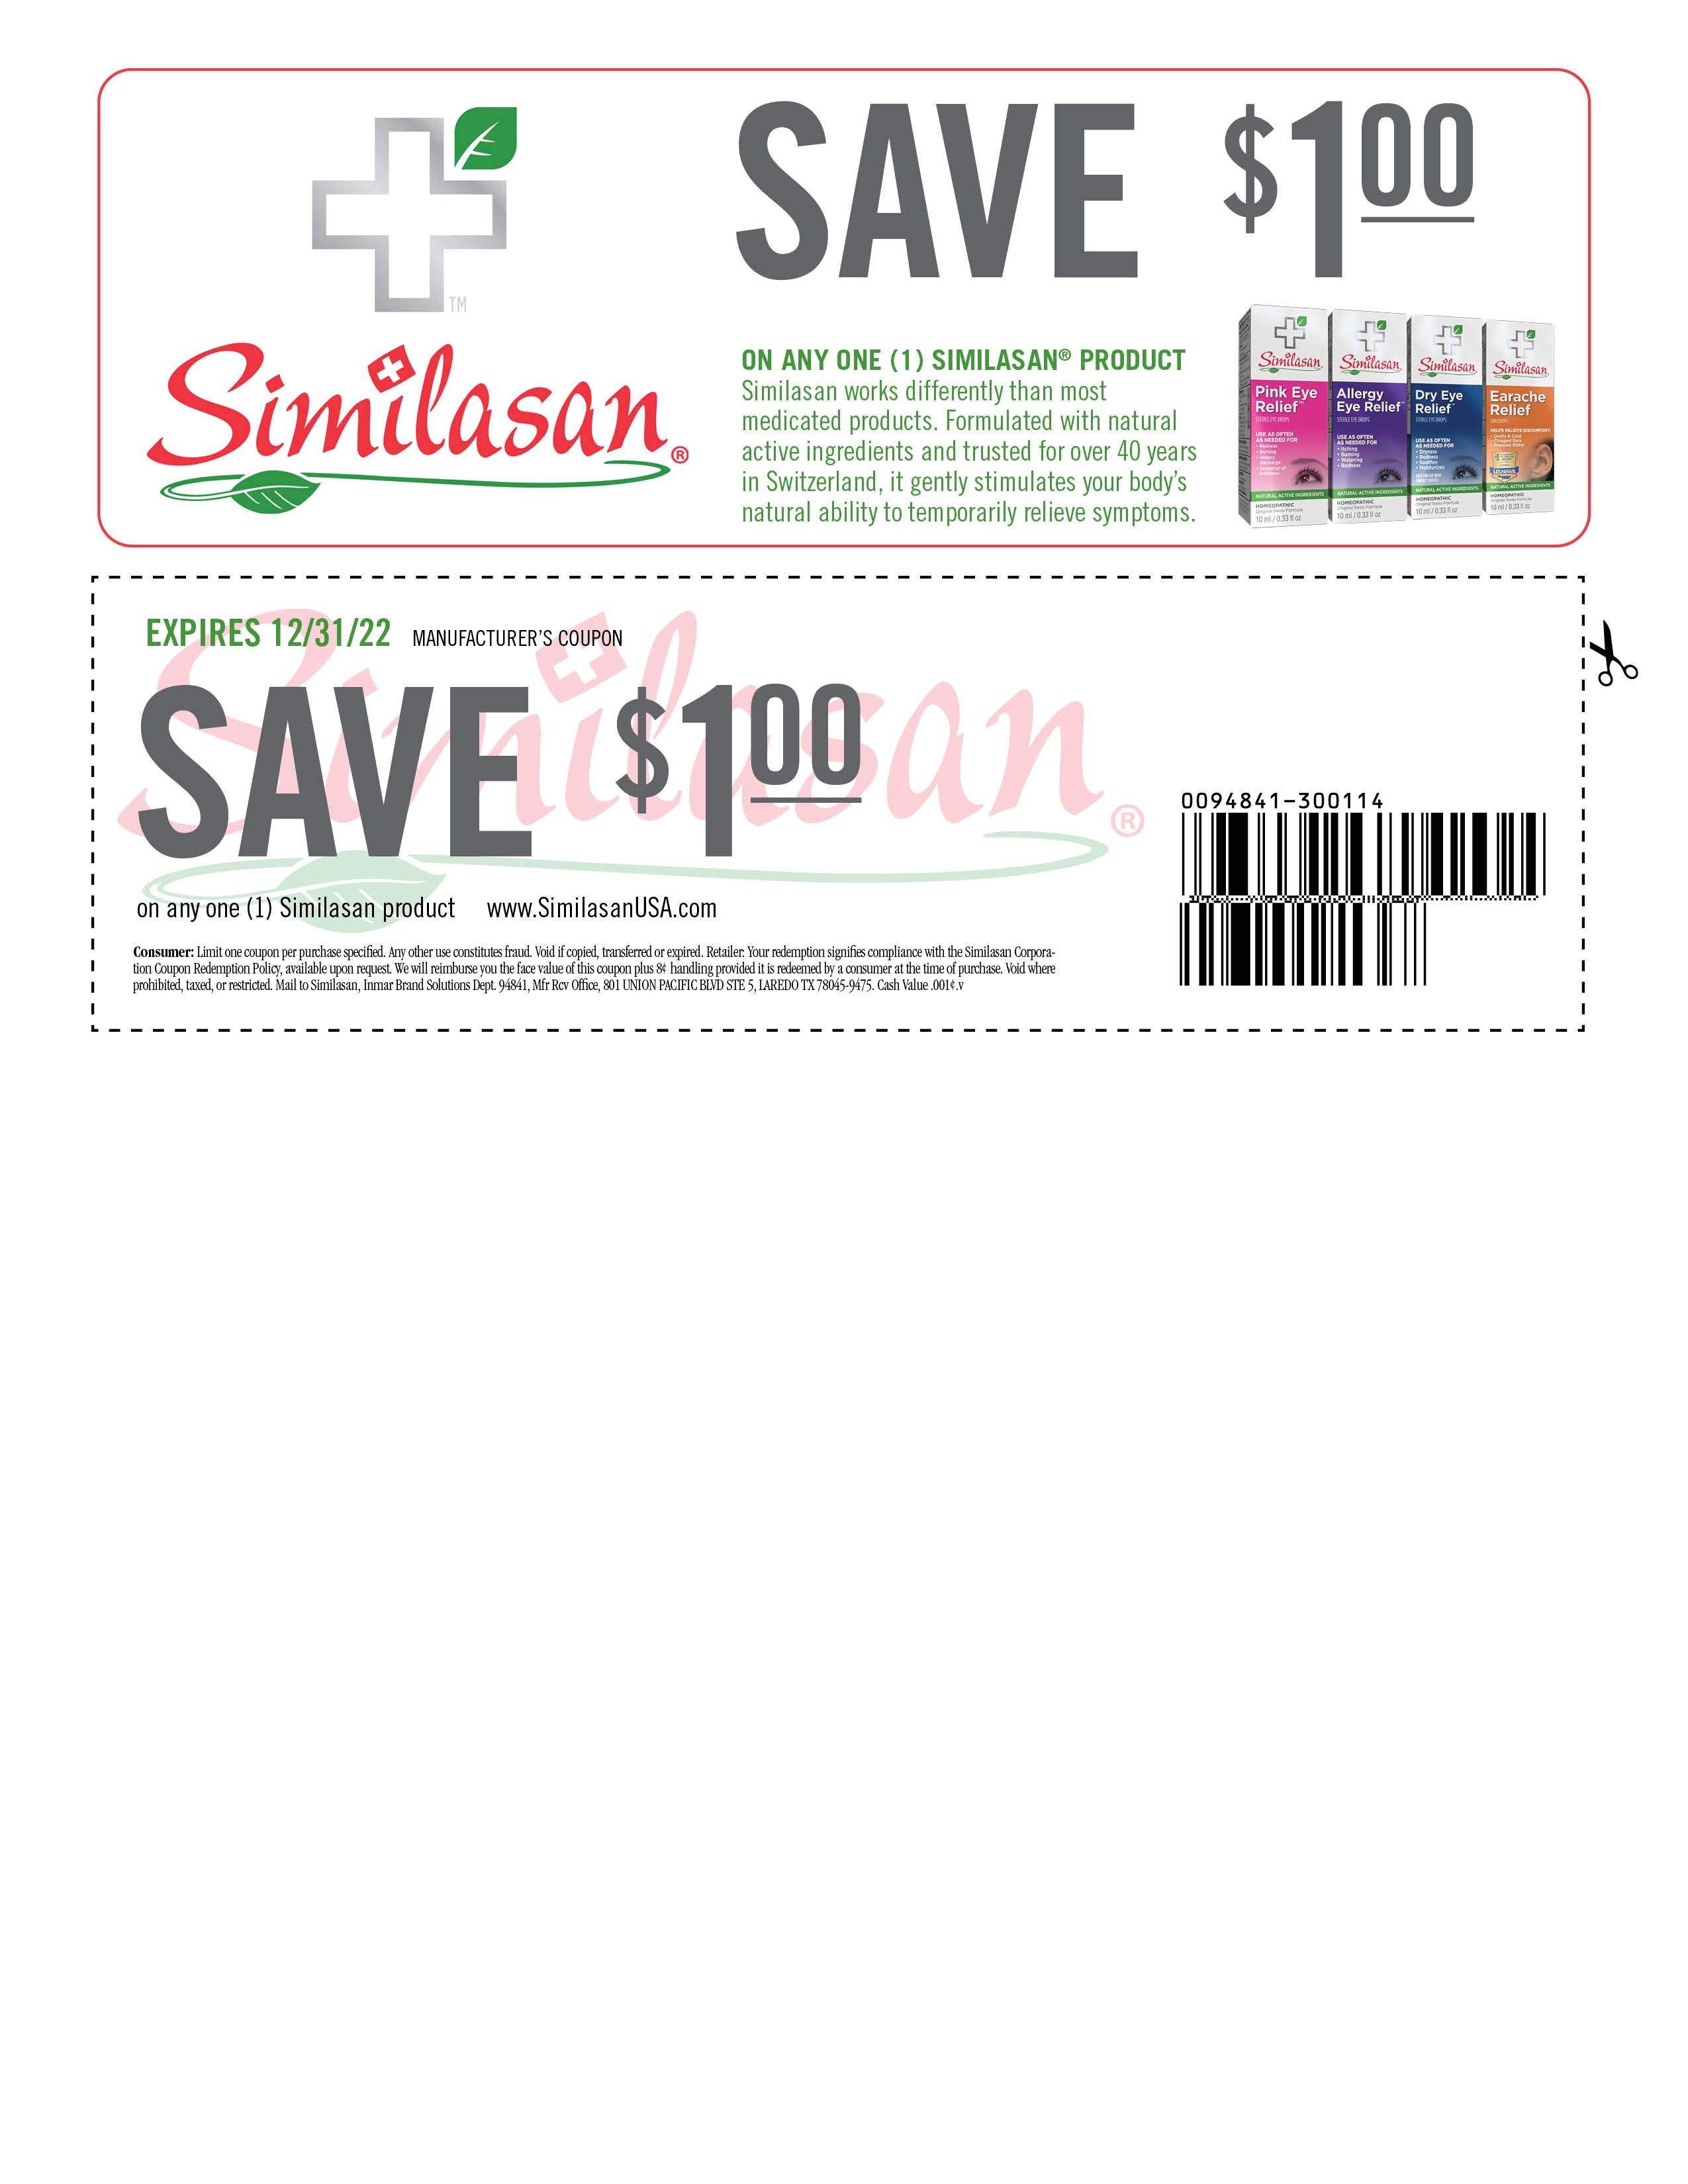 Save one dollar on Similasan products